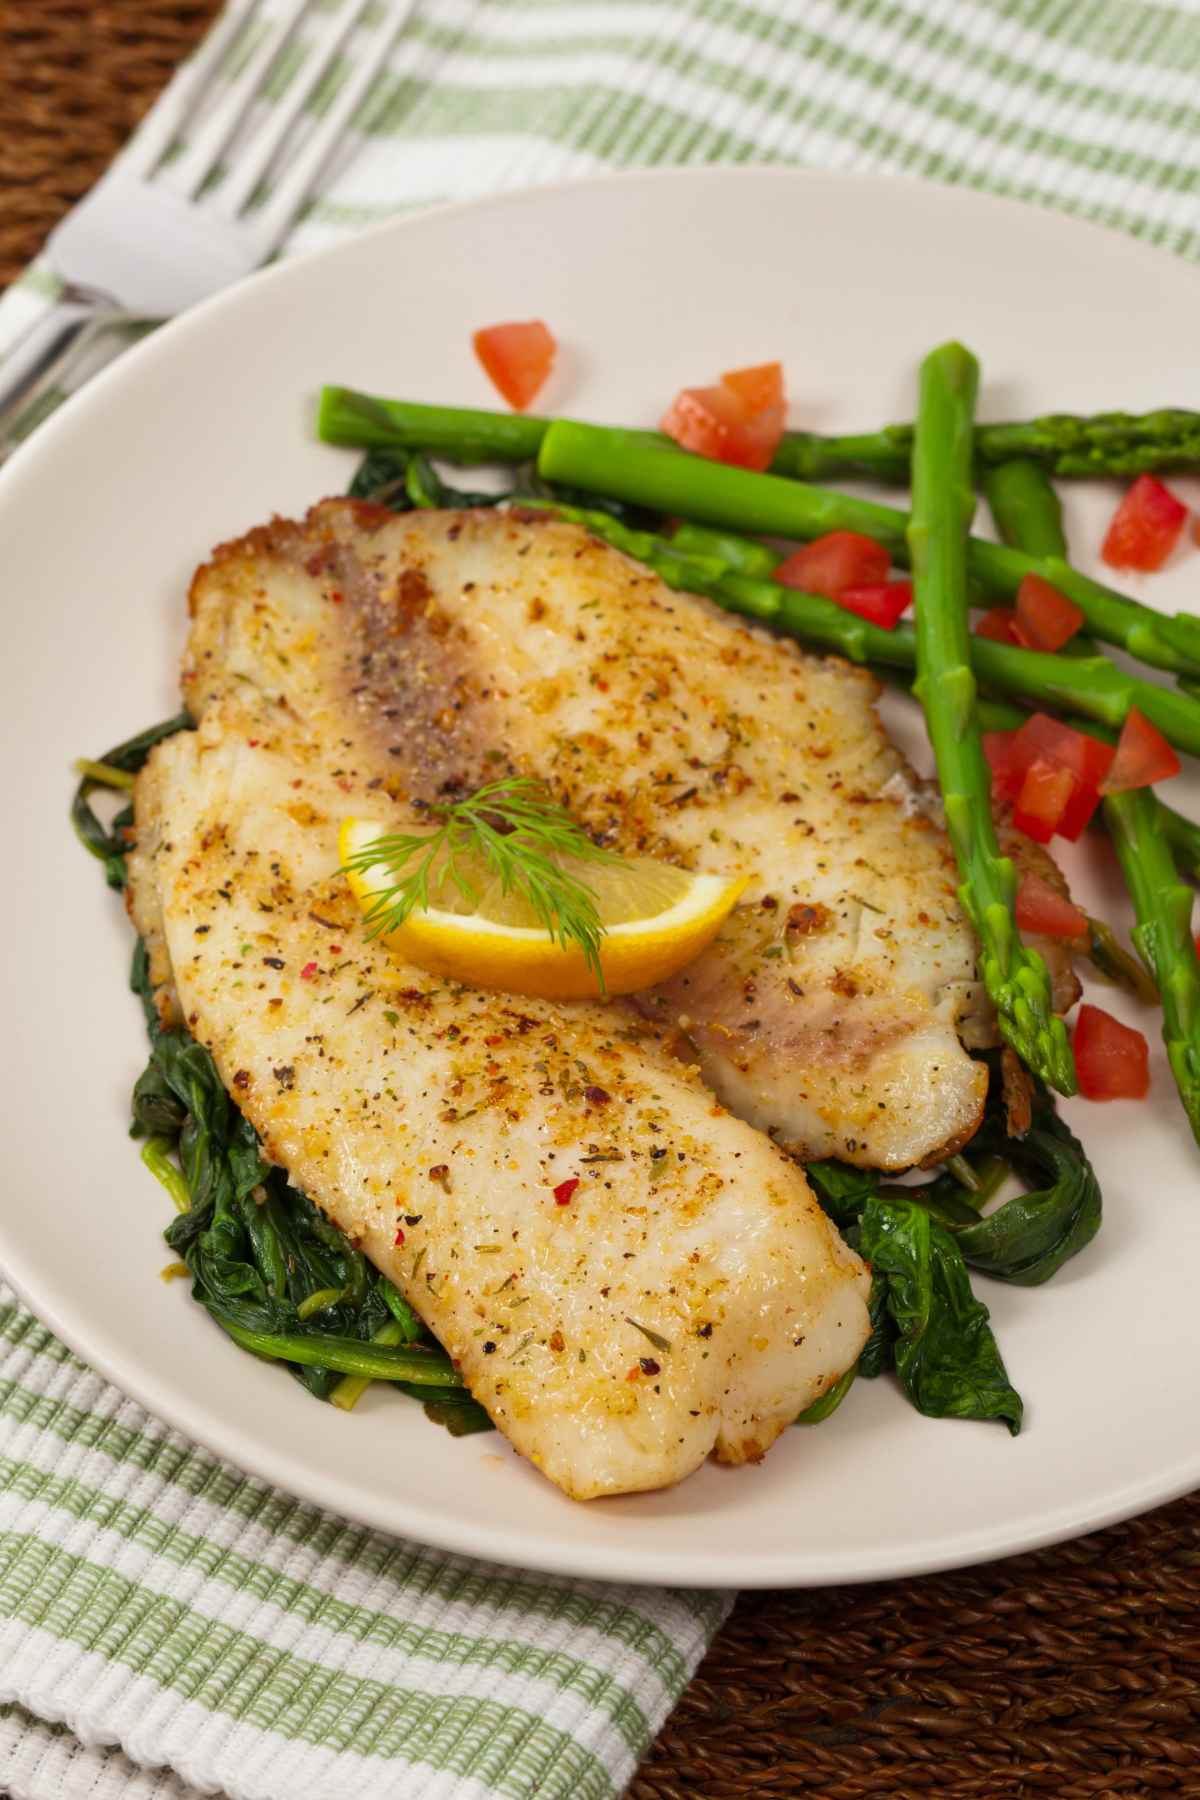 Wondering what Tilapia Internal Temp is best? Measuring the internal temp of tilapia helps ensure perfectly cooked fish while ensuring harmful bacteria have been eliminated.